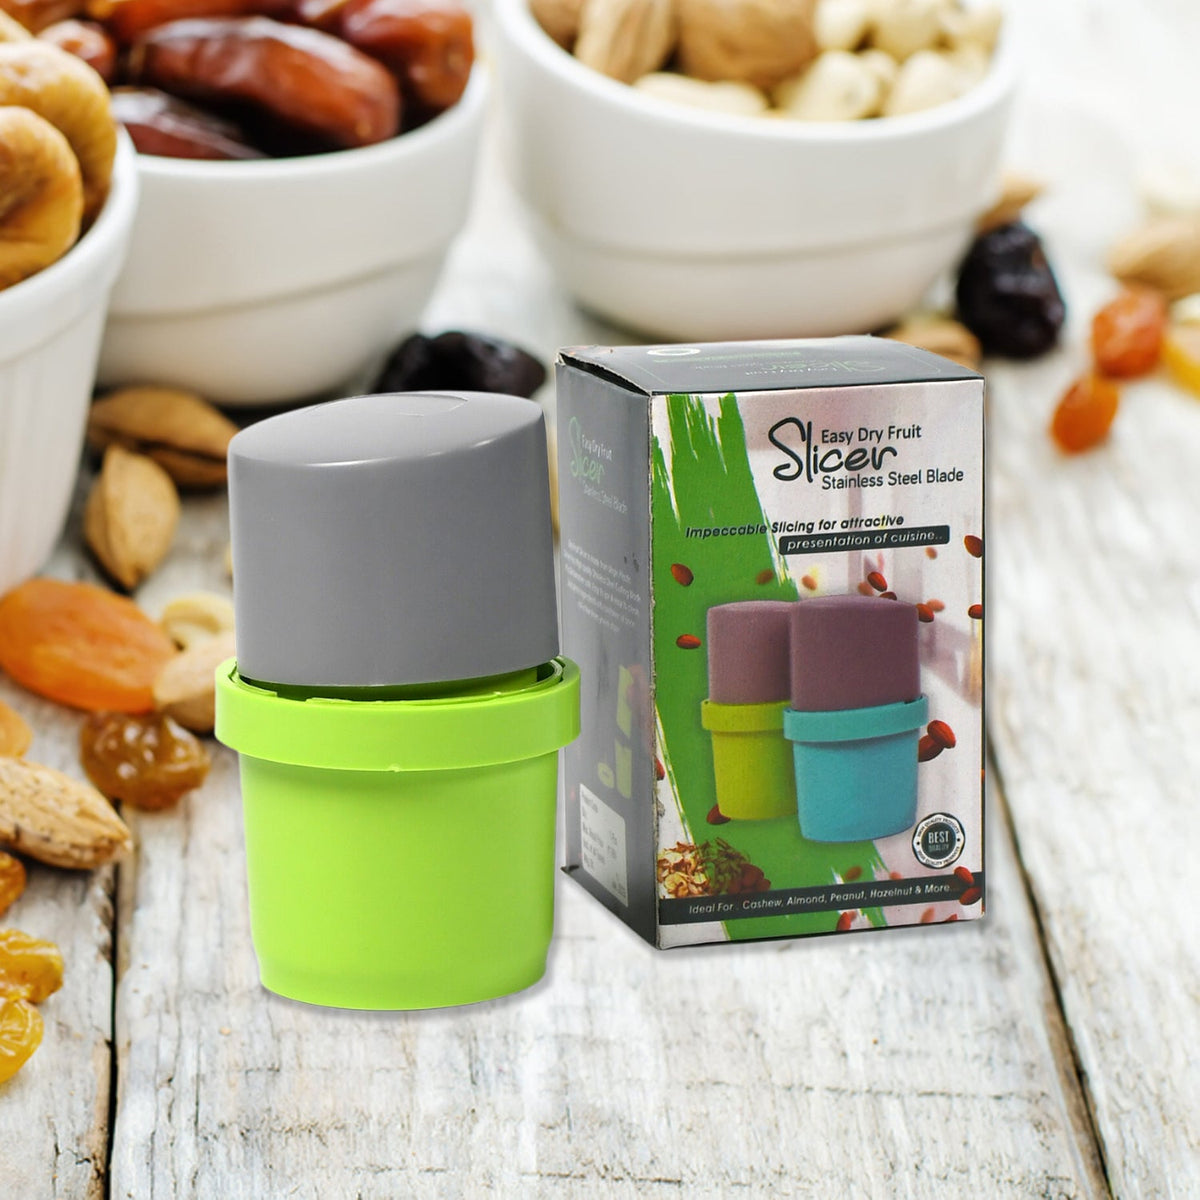 5333 Plastic Dry Fruit and Paper Mill Grinder Slicer, Chocolate Cutter and  Butter Slicer with 3 in 1 Blade, Standard, Multicolor